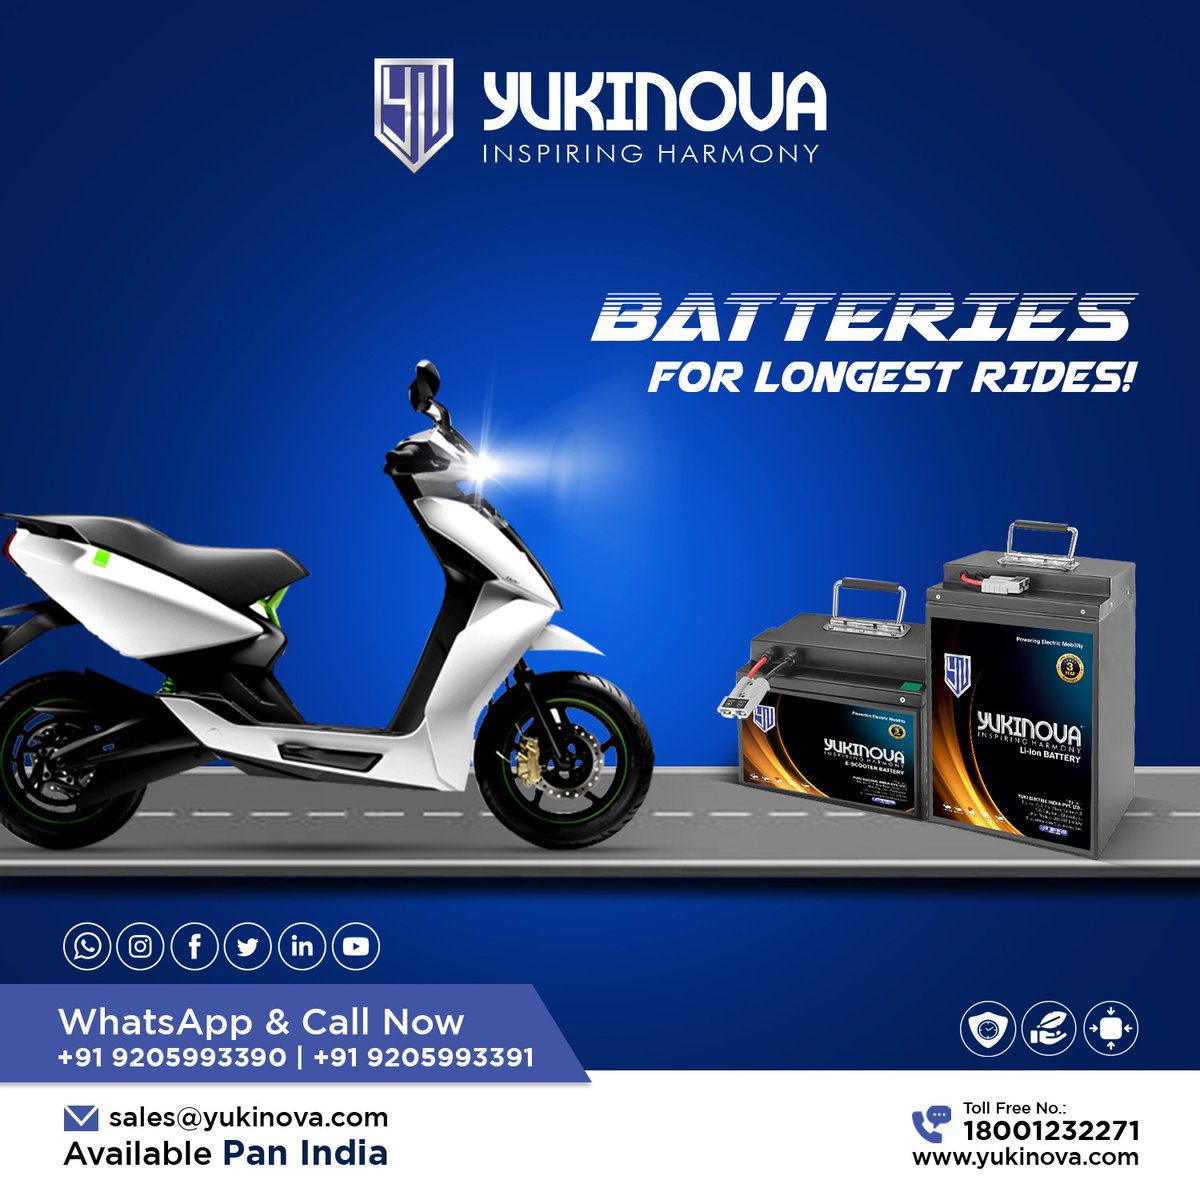 Choose durable Yukinova batteries for hassle free and longer scooty rides. 
Contact and follow us for more details.
.
Visit Us At - yukinova.com
.
. 
#Yukinova #yukinovabattery #batterymanufacturer #batterymanufacturing #batterymanufacturerindia